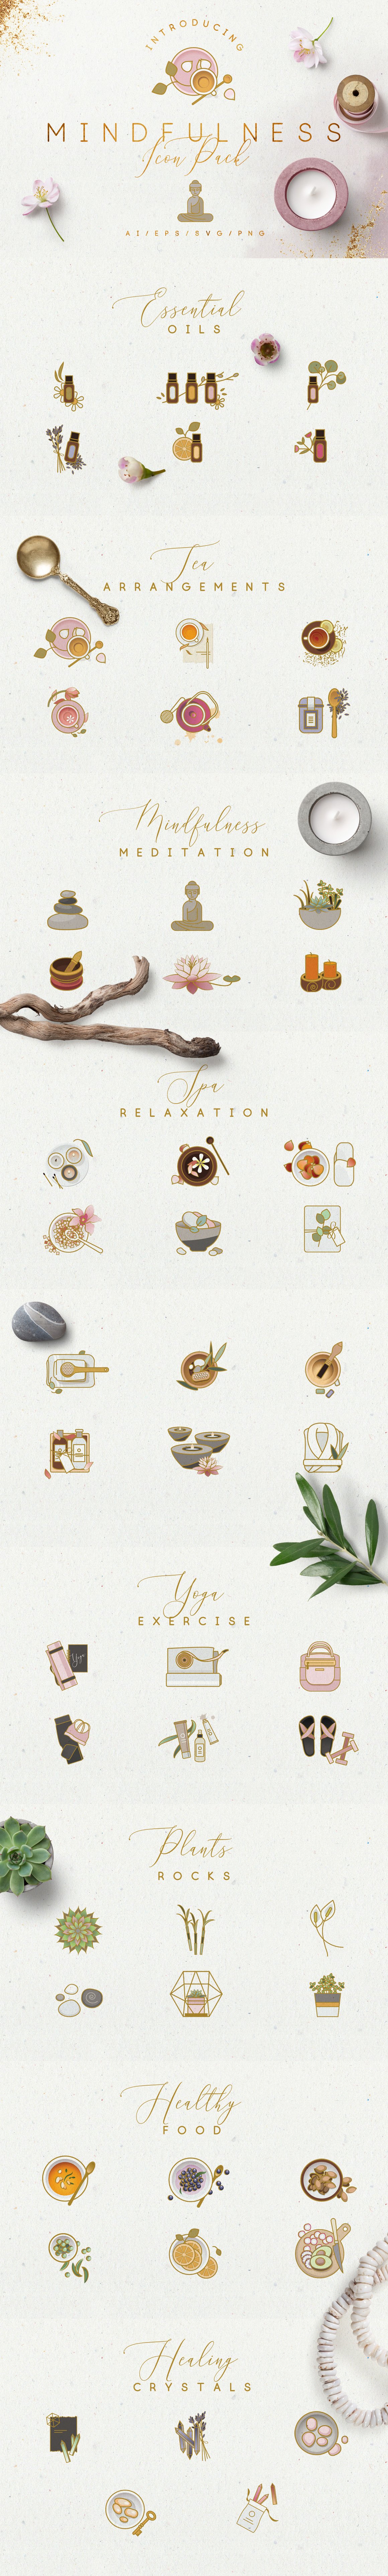 Mindfulness Icon Pack cover image.